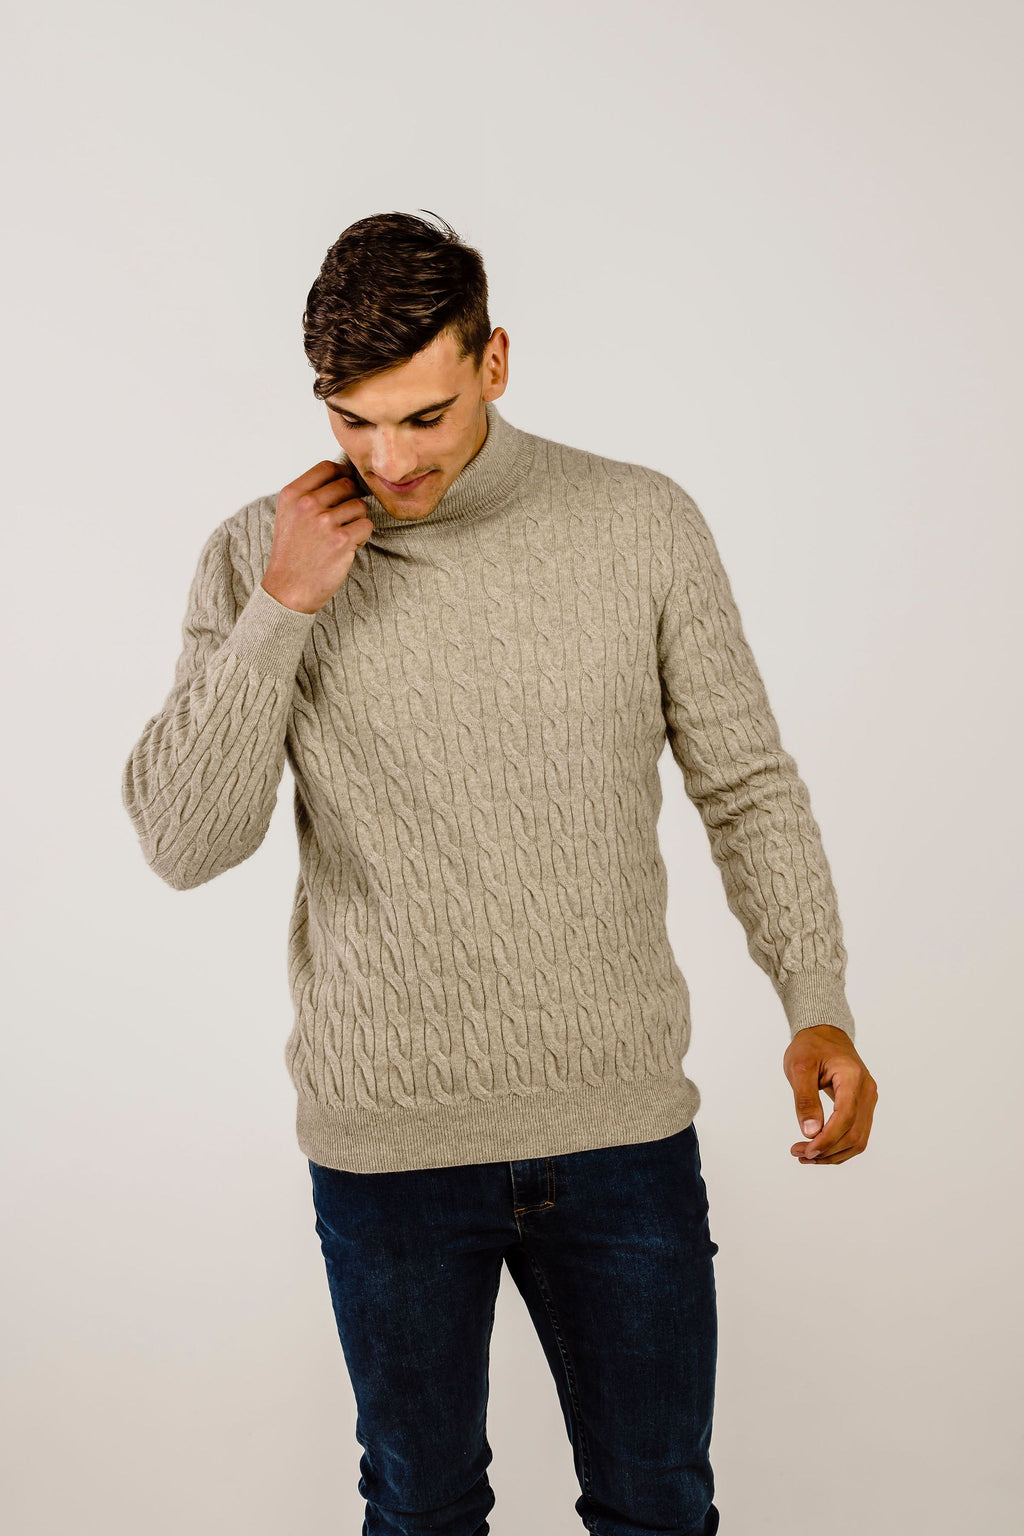 Cashmere Turtleneck Sweater - Made in New Zealand